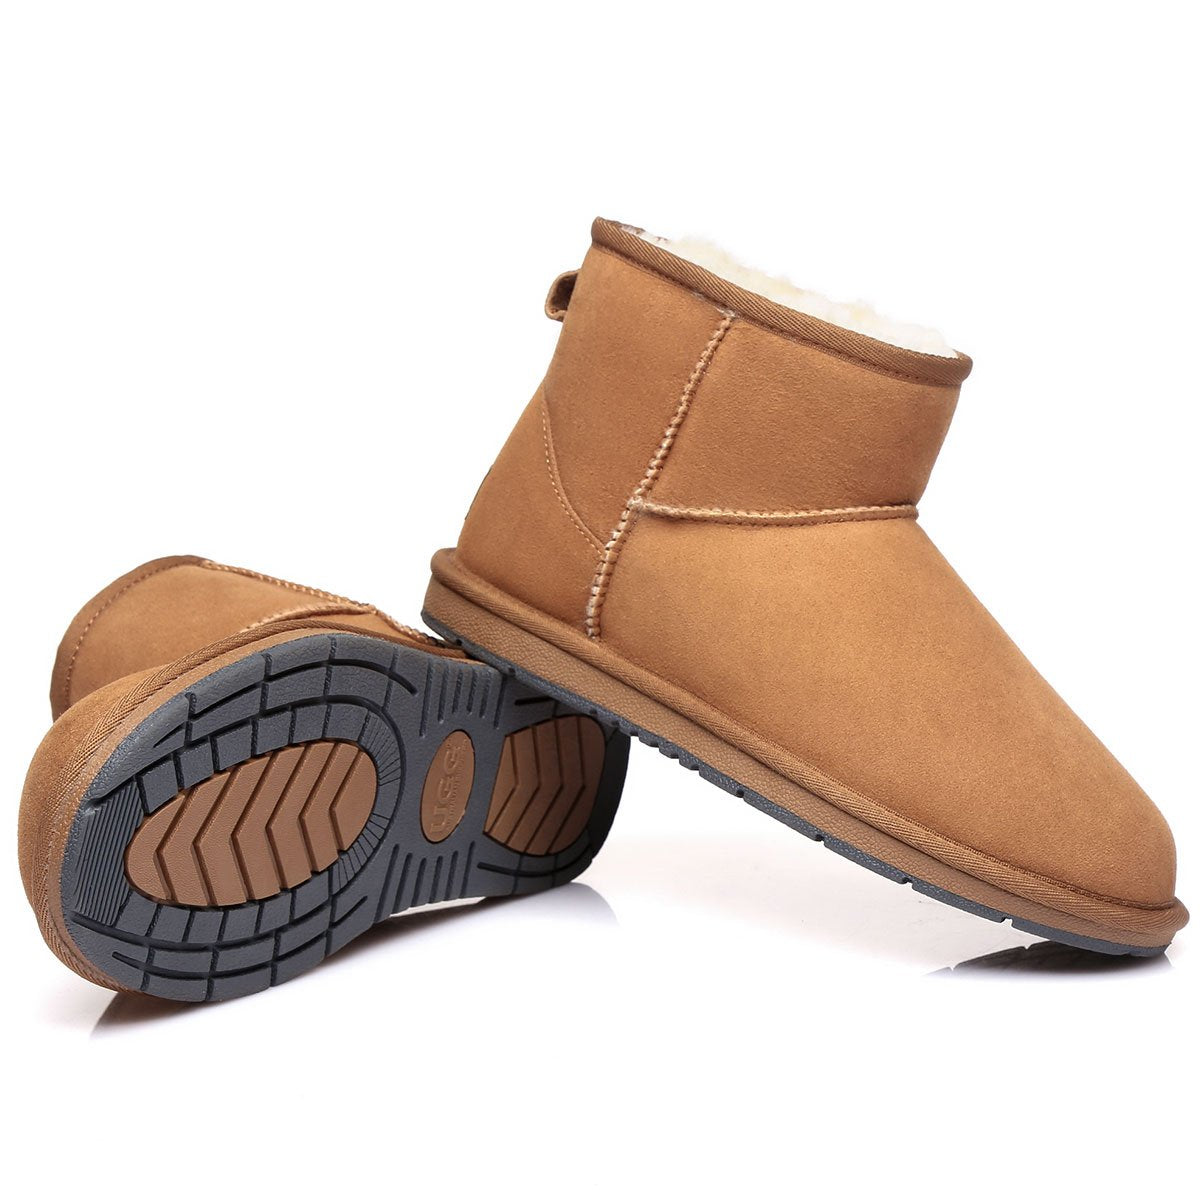 Mini Classic Suede UGG Boots